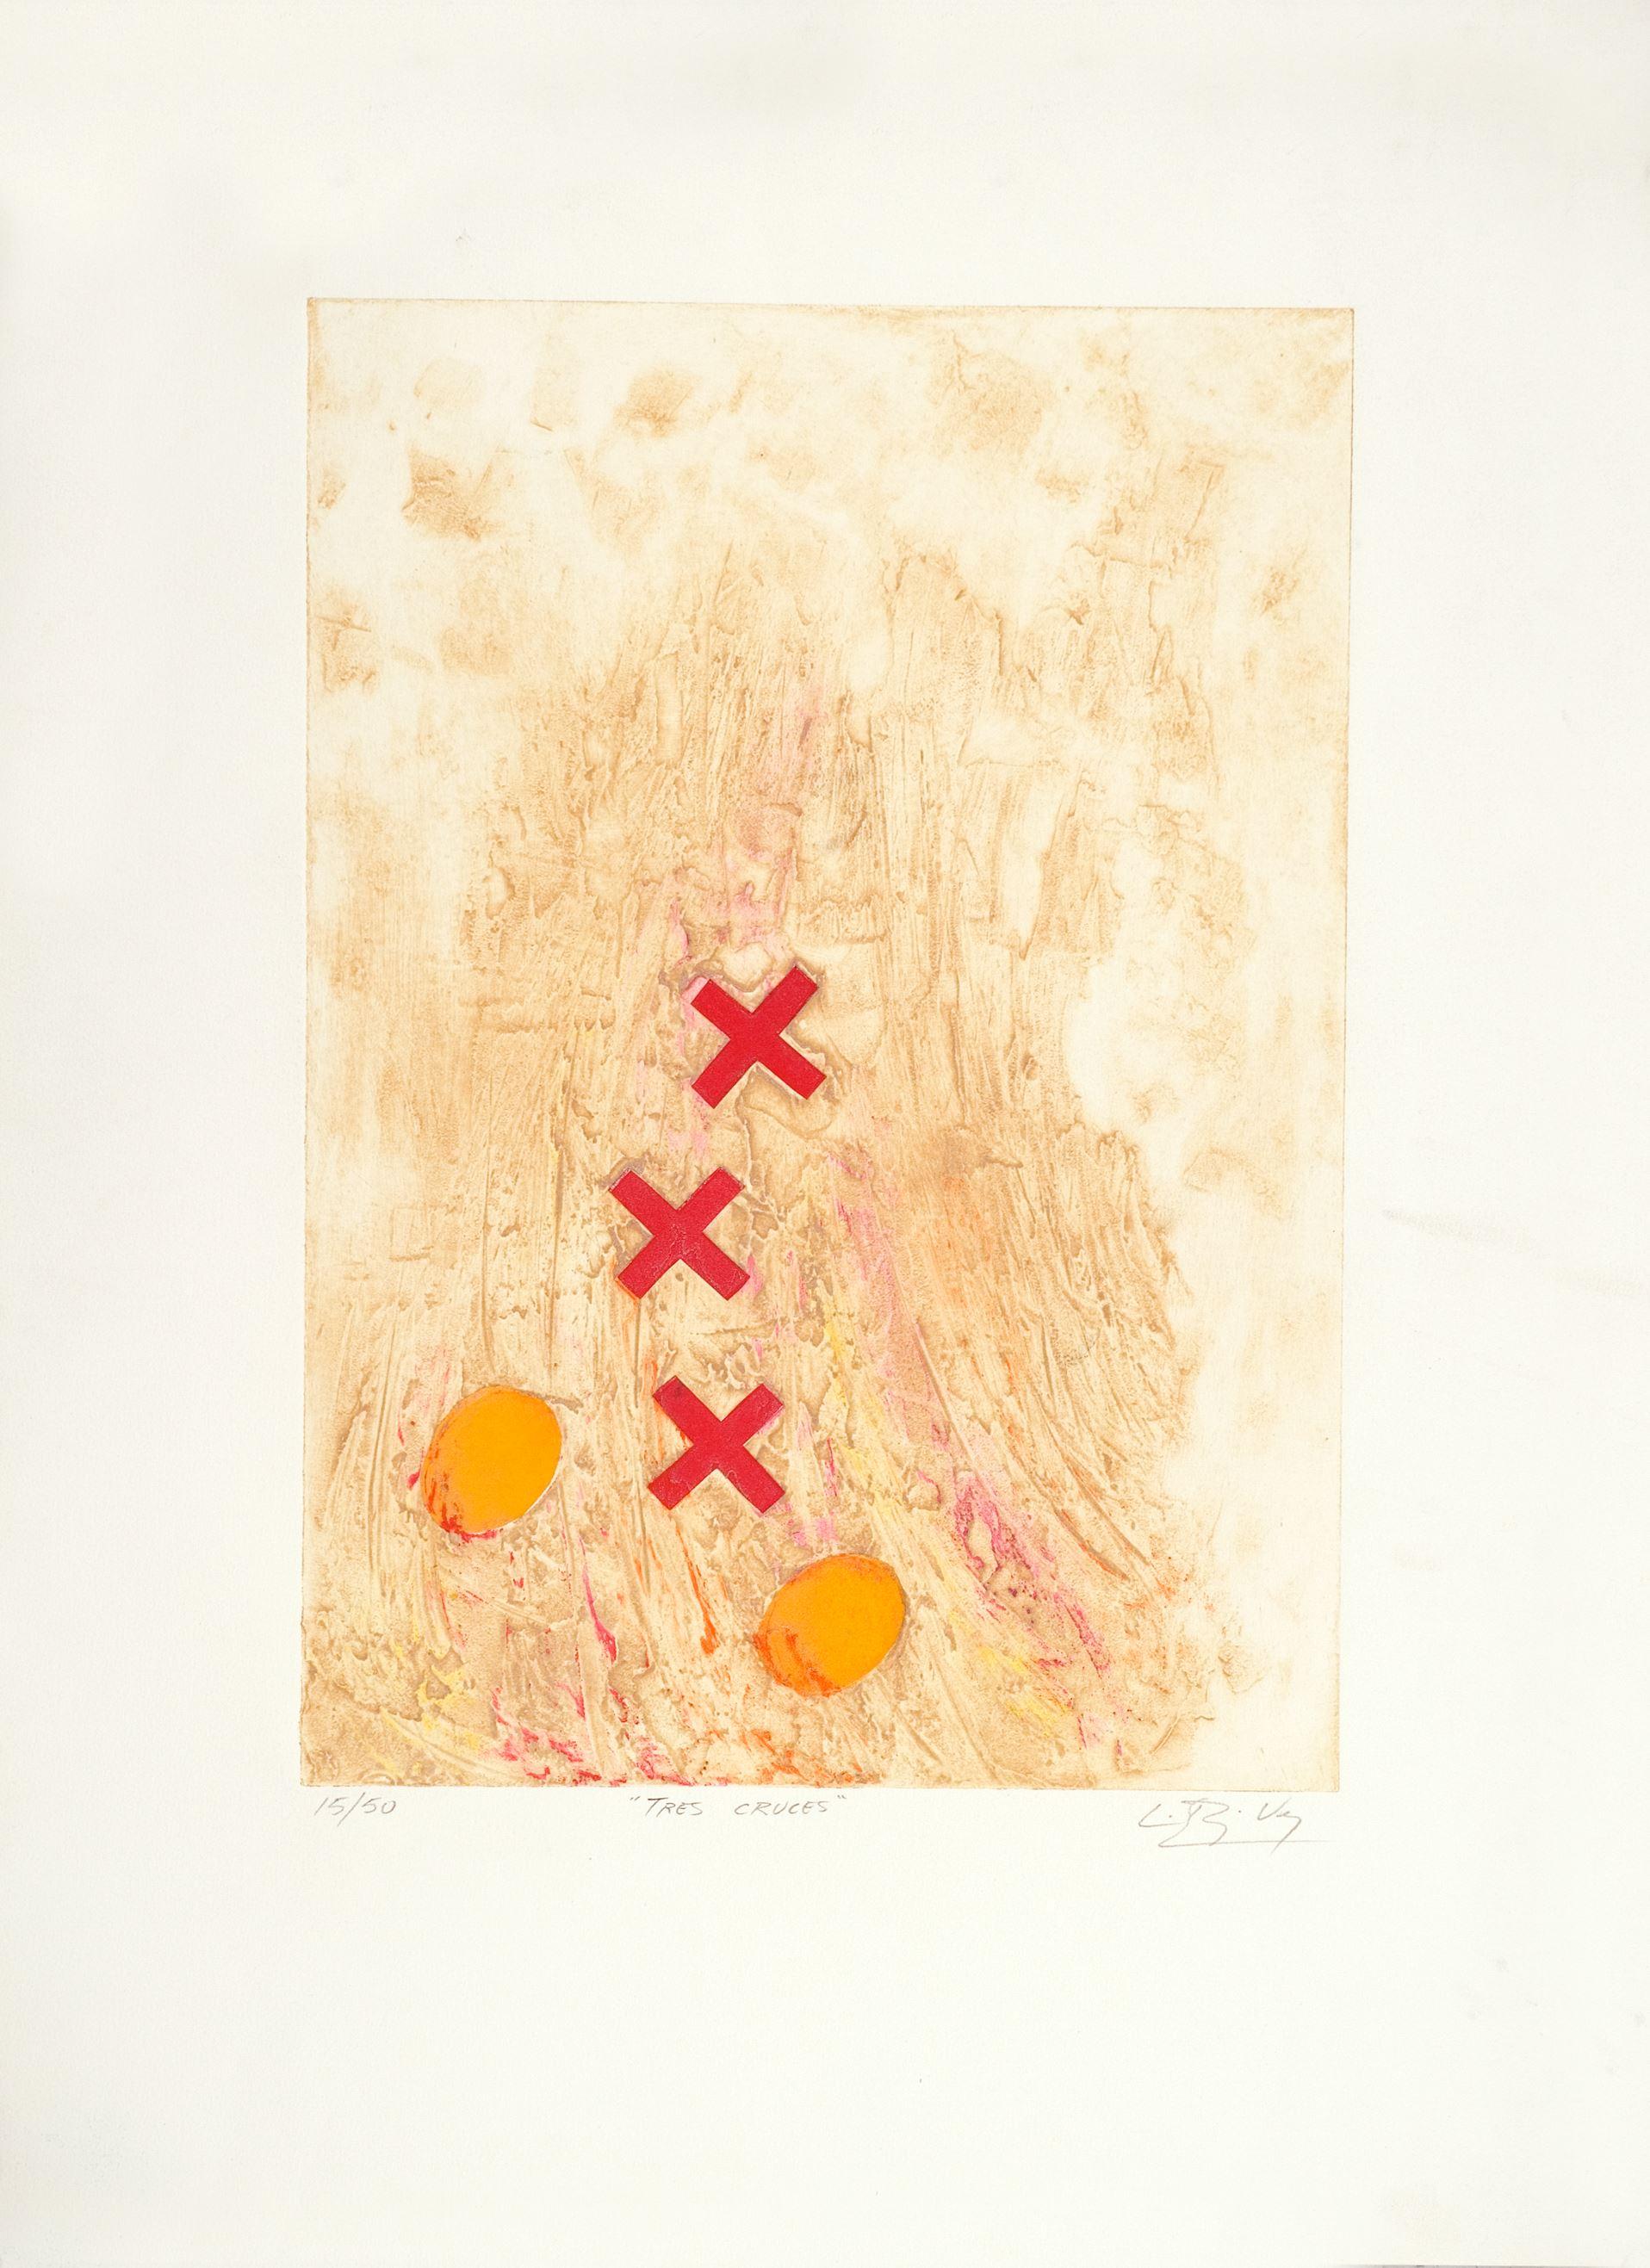 Luis Pérez Vega (Spain, 1976)
'Tres cruces', 1995
engraving on paper
13.8 x 19.7 in. (35 x 50 cm.)
Edition of 50
ID: PER1275-005-050
Hand-signed by author